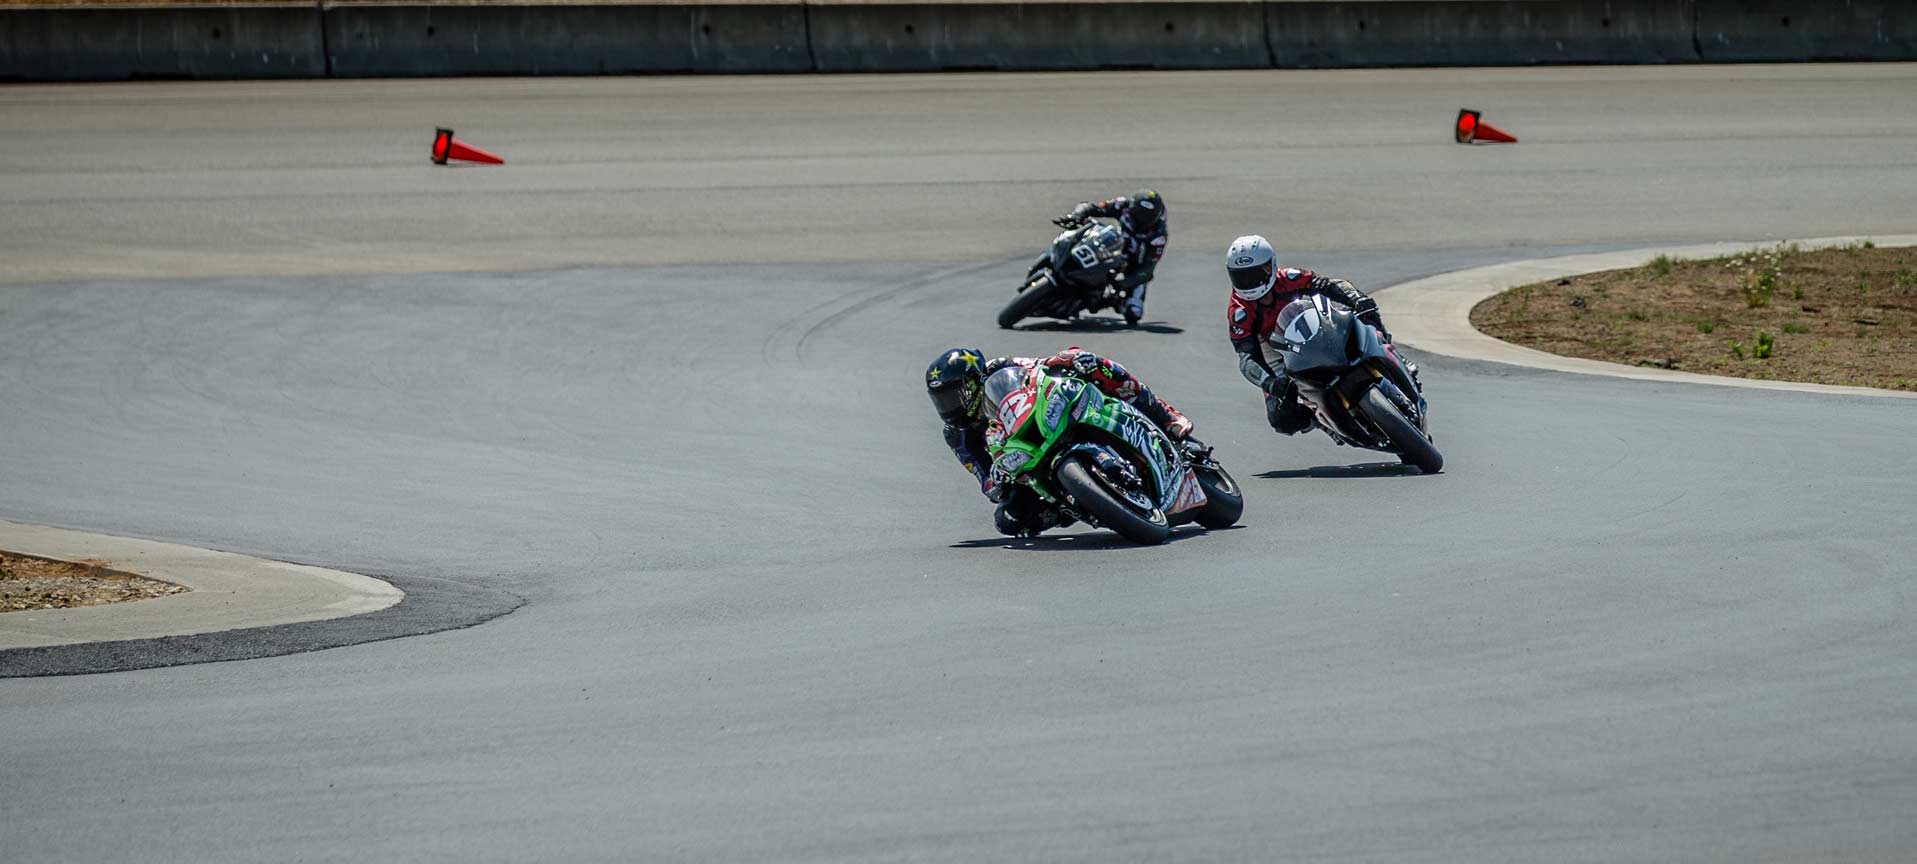 Andy DiBrino leading the hunt in the 1000cc open superbike and formula ultra in Oregon and Washington combined motorcycle road racing event at The Ridge.